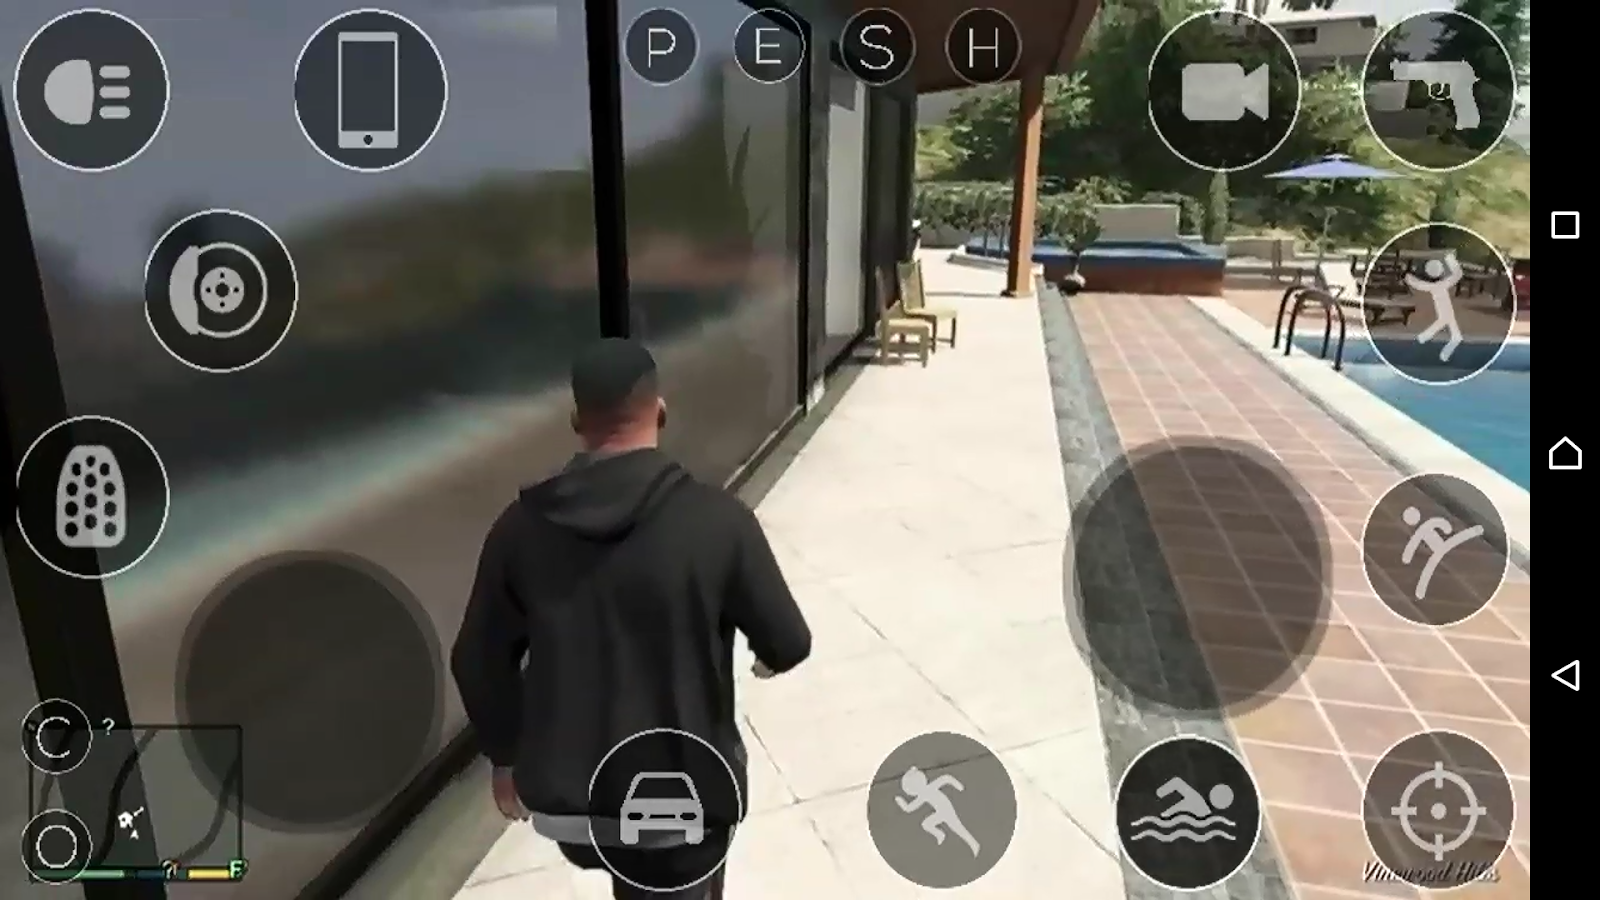 Gta 5 on android mobile фото 117